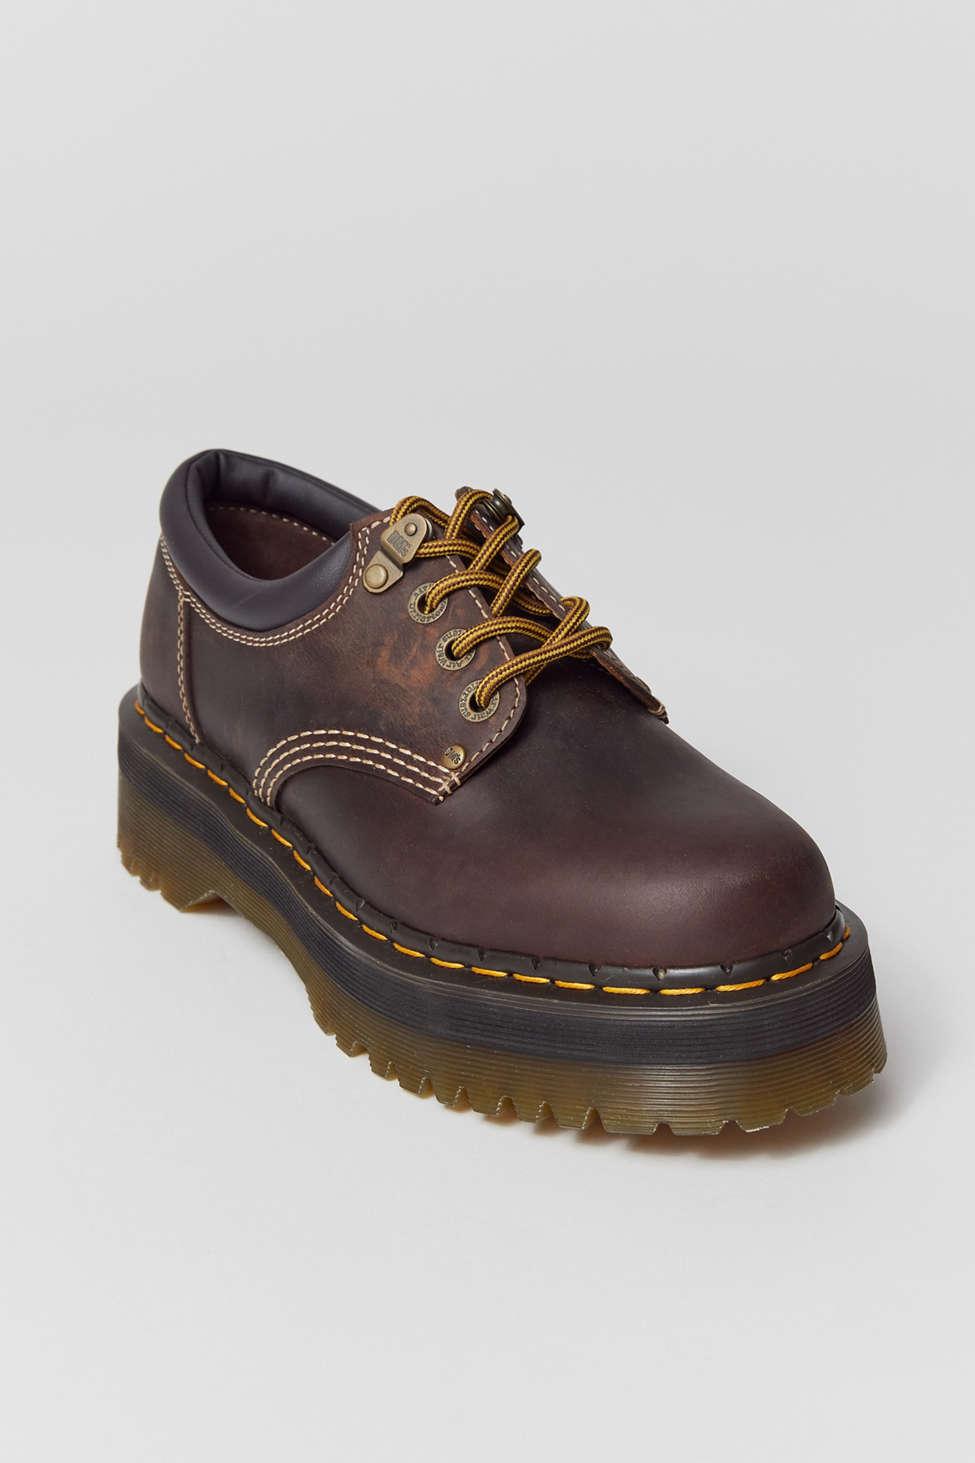 Dr. Martens 8053 Quad Ii Arc Oxford Shoe Shoe In Brown,at Urban Outfitters  in Pink | Lyst